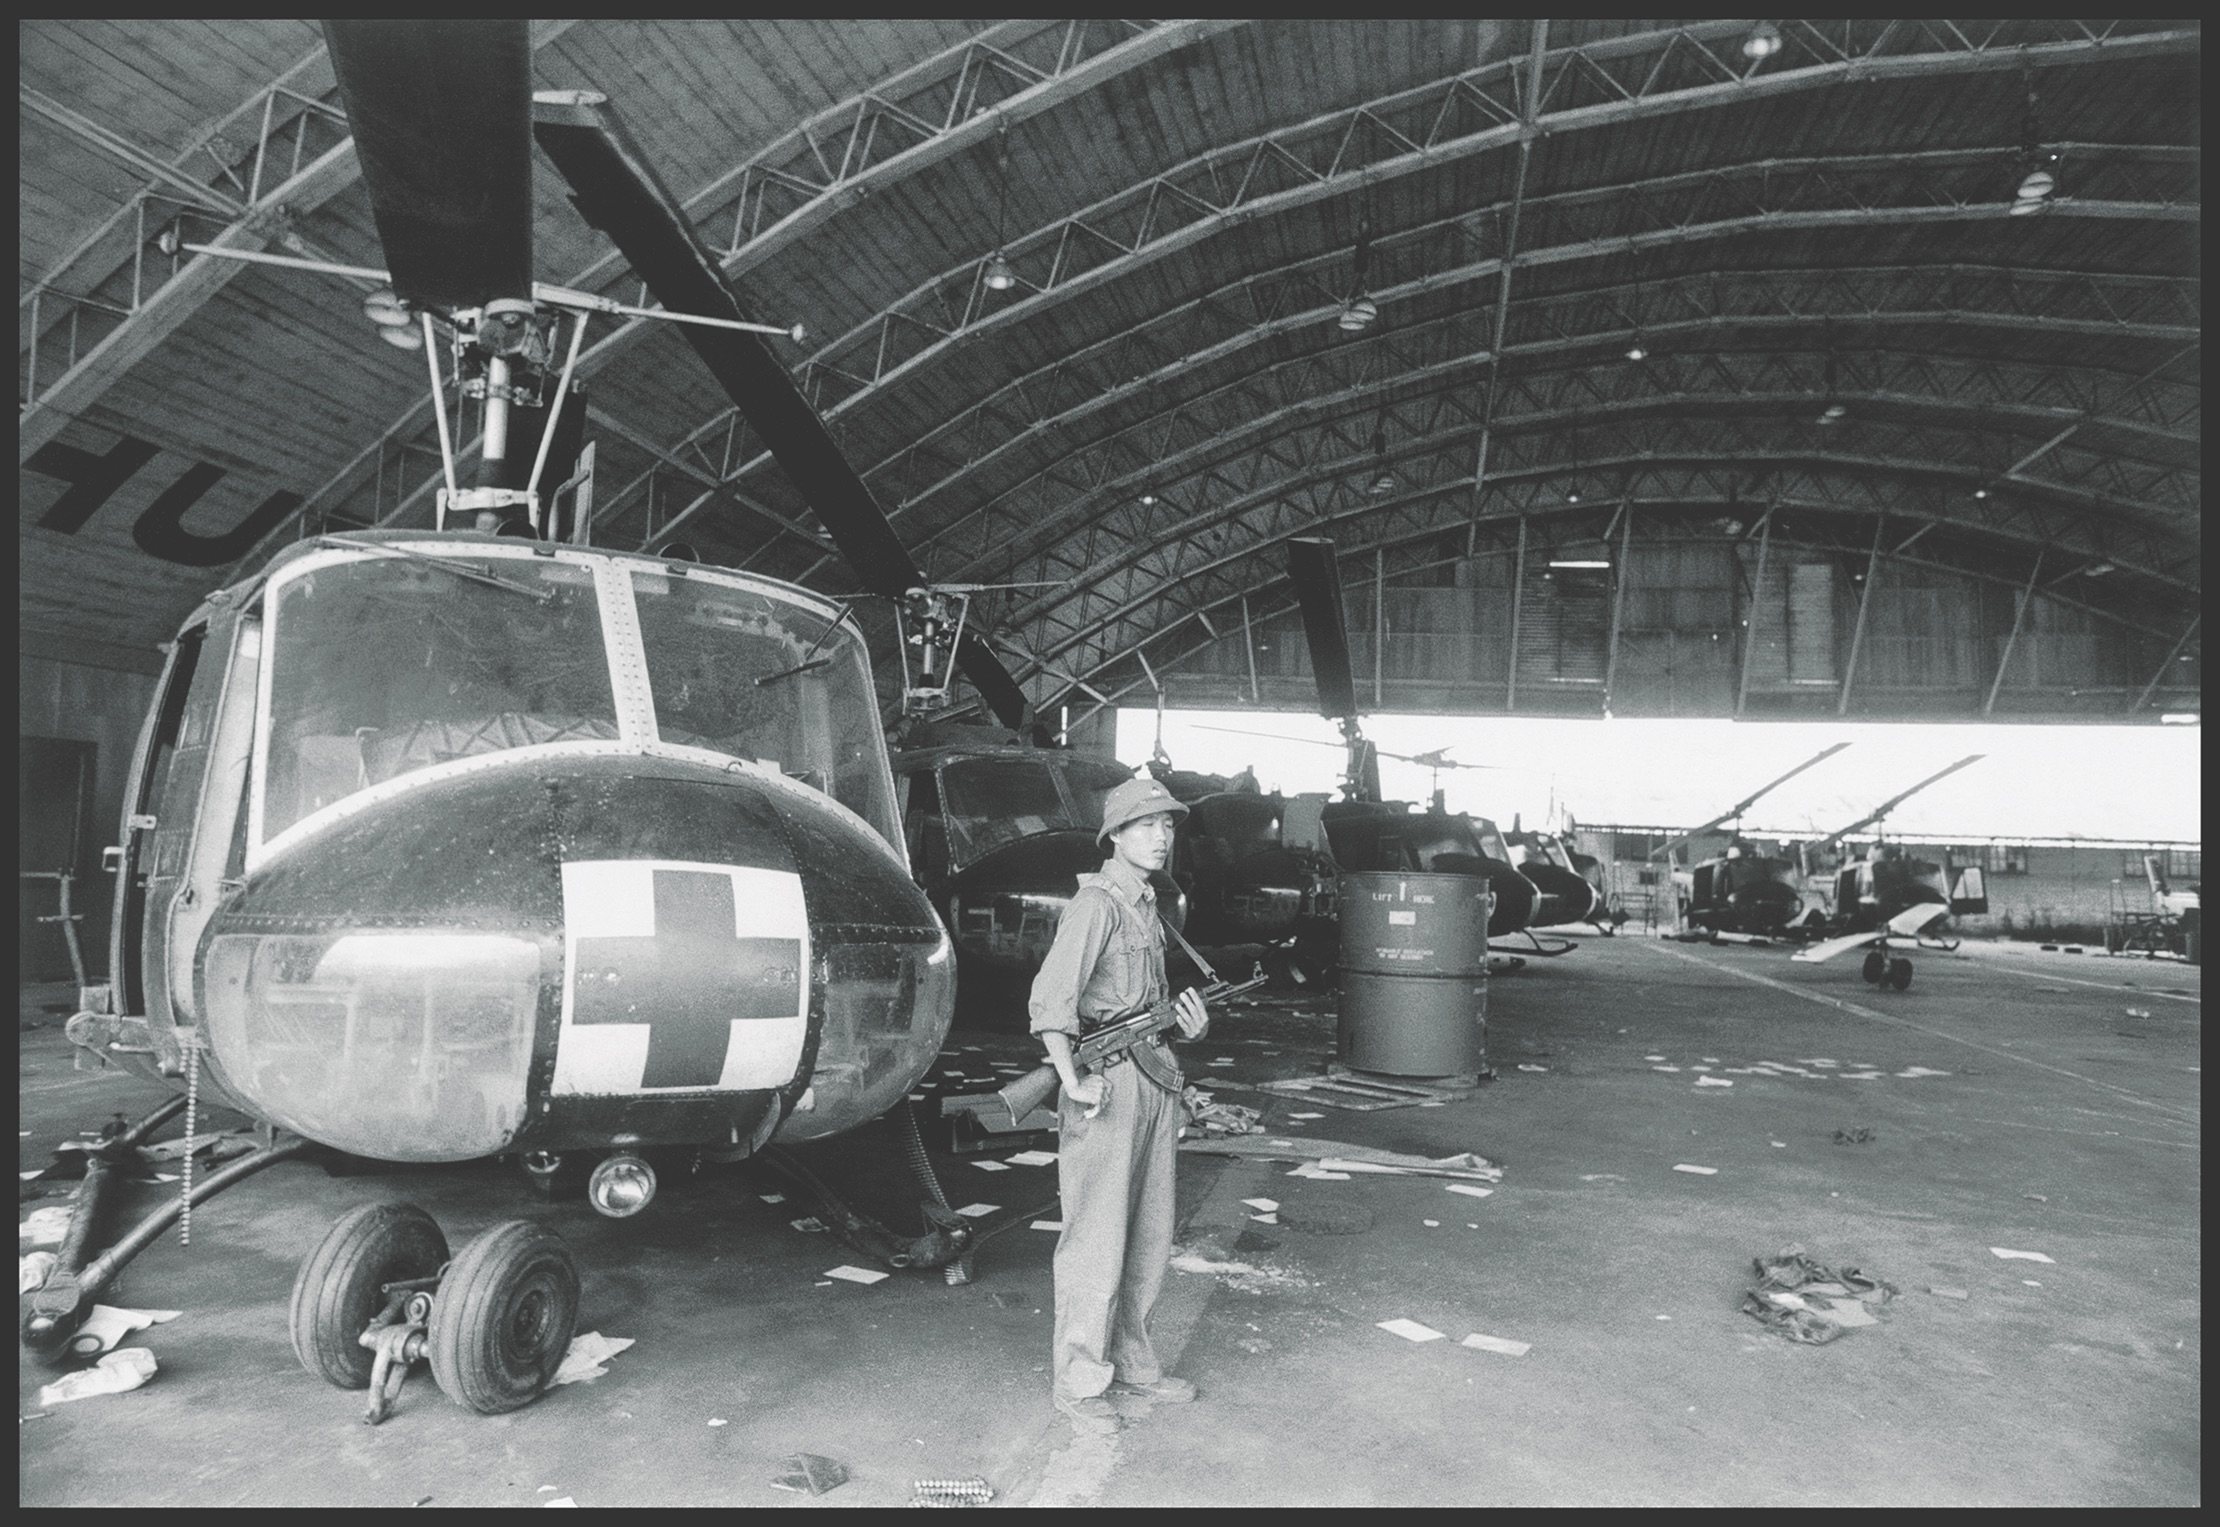 After Da Nang fell on March 29, 1975, a North Vietnamese Army soldier stands alongside the spoils of war, a broken-down American-made Huey helicopter. (A. Abbas/Magnam Photo)